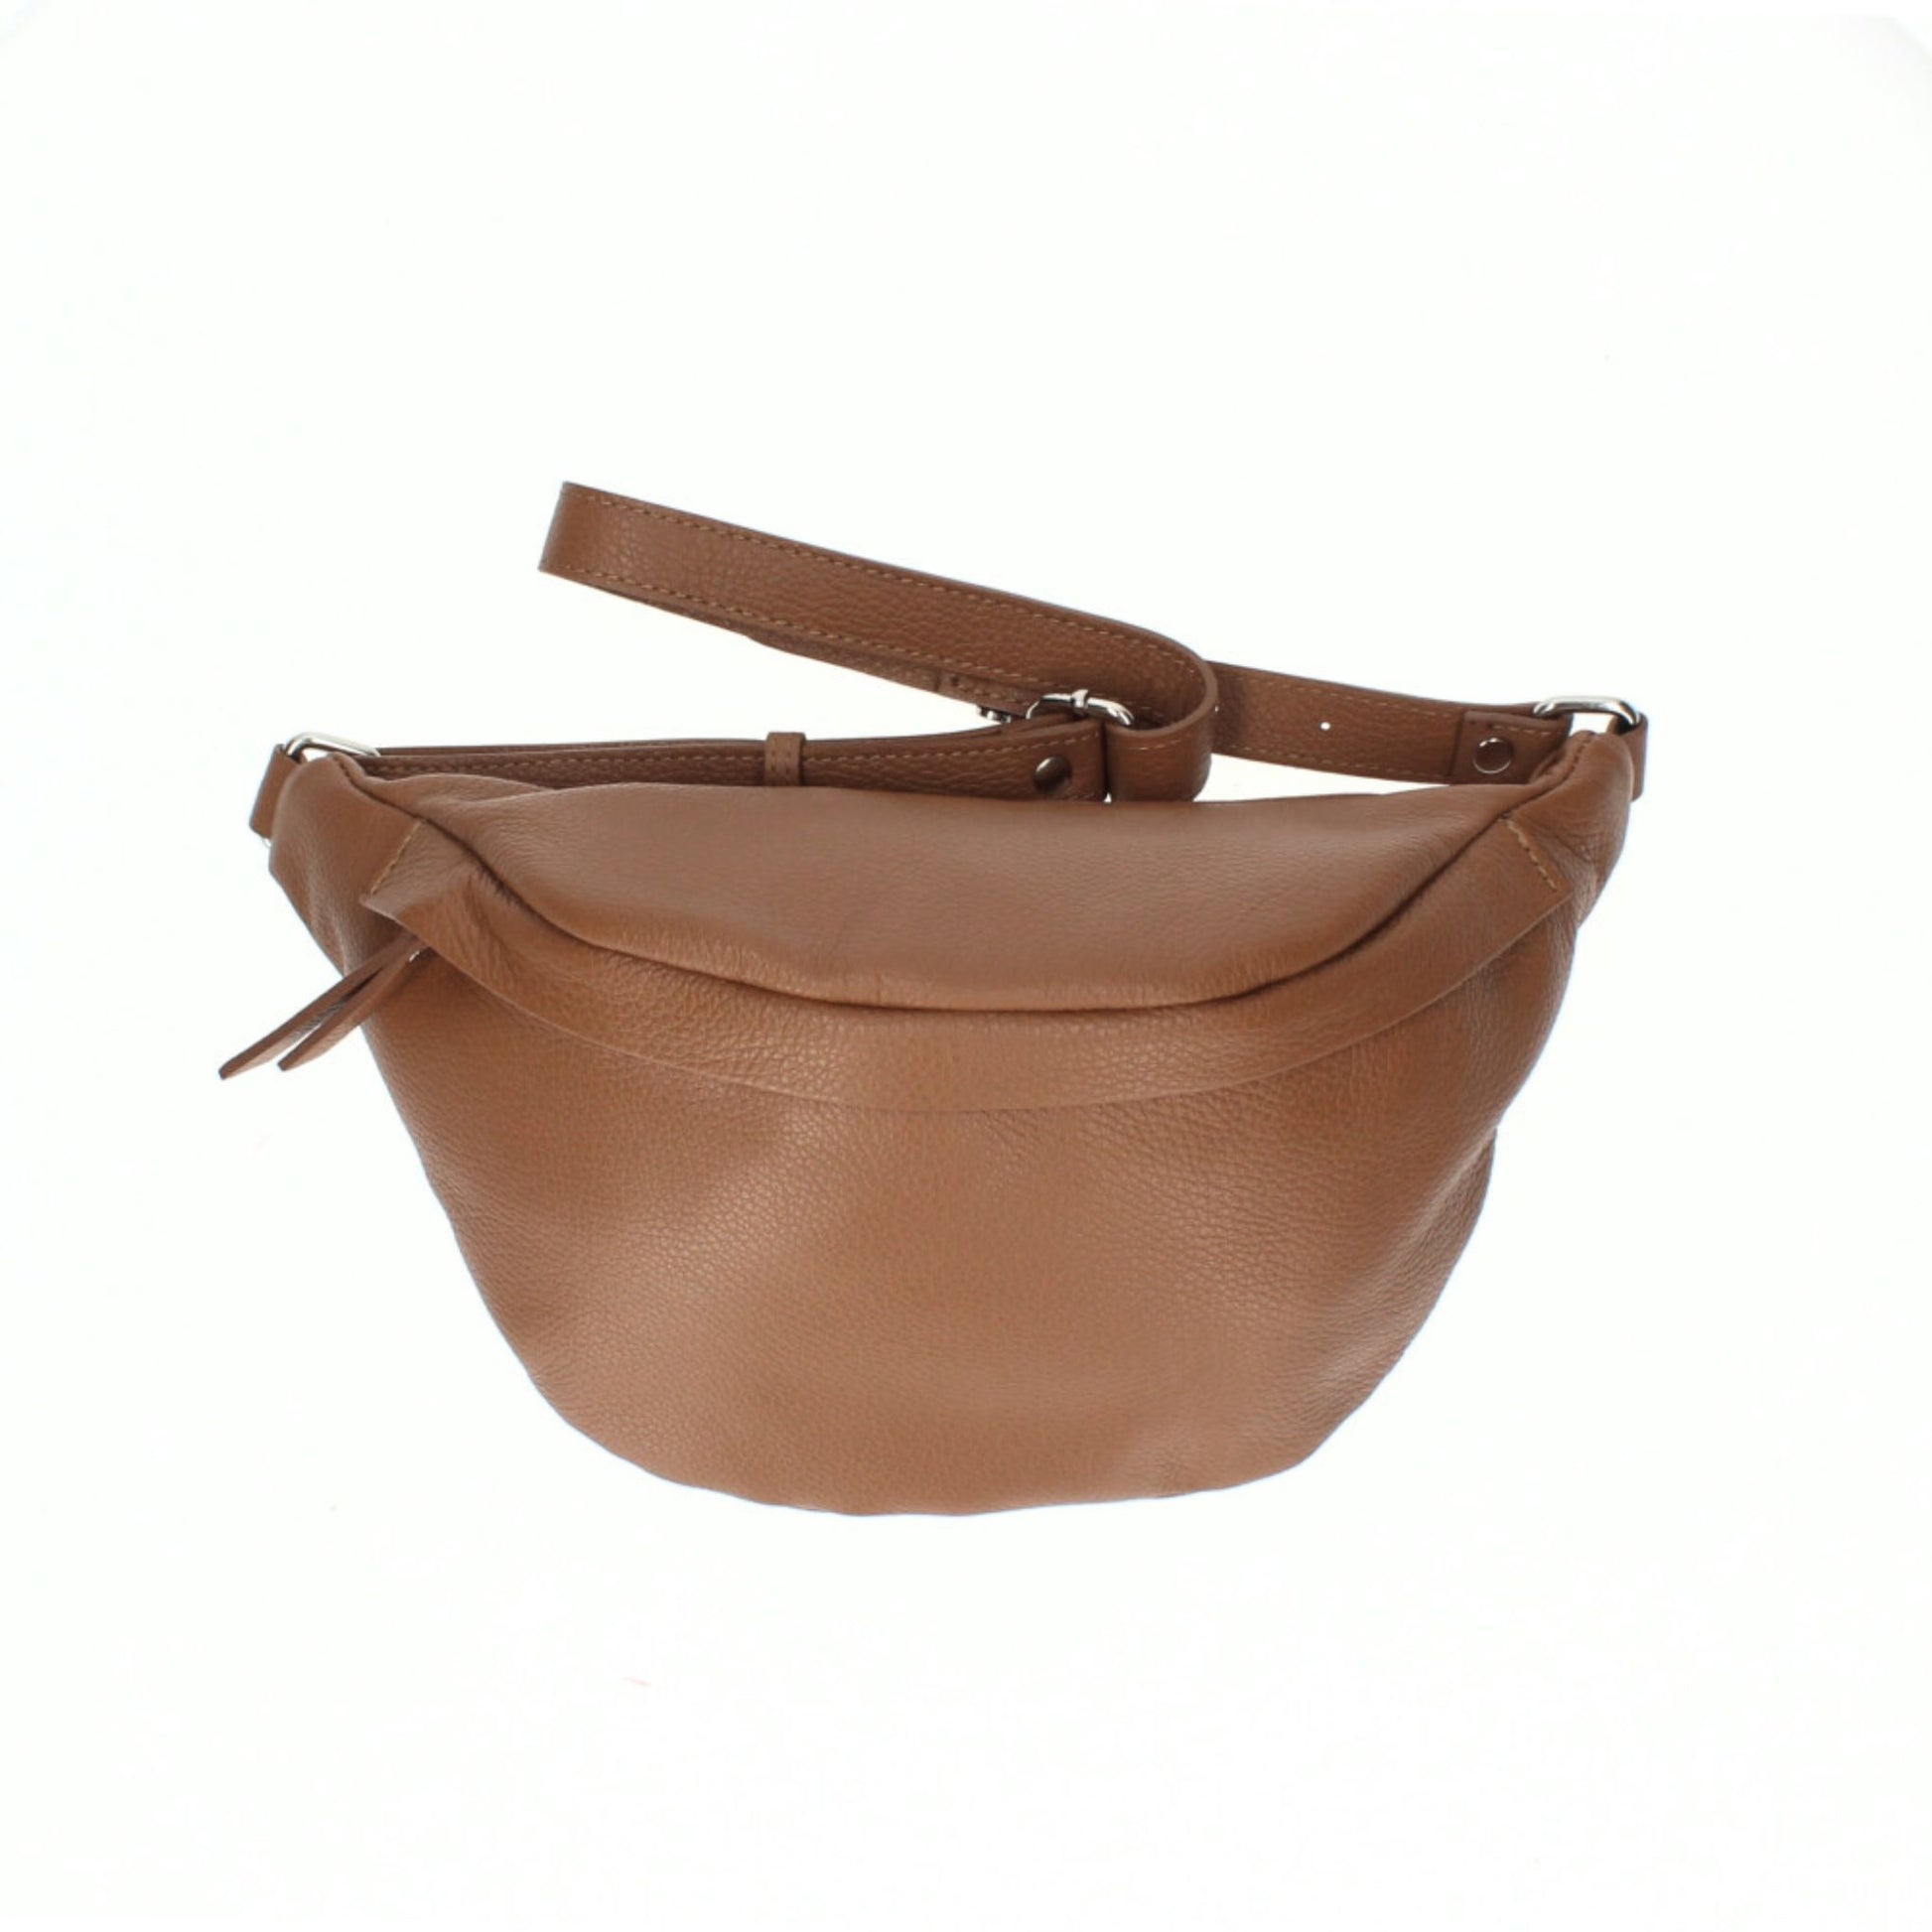 Stylish brown leather sling bag with Italian craftsmanship and lined interior.